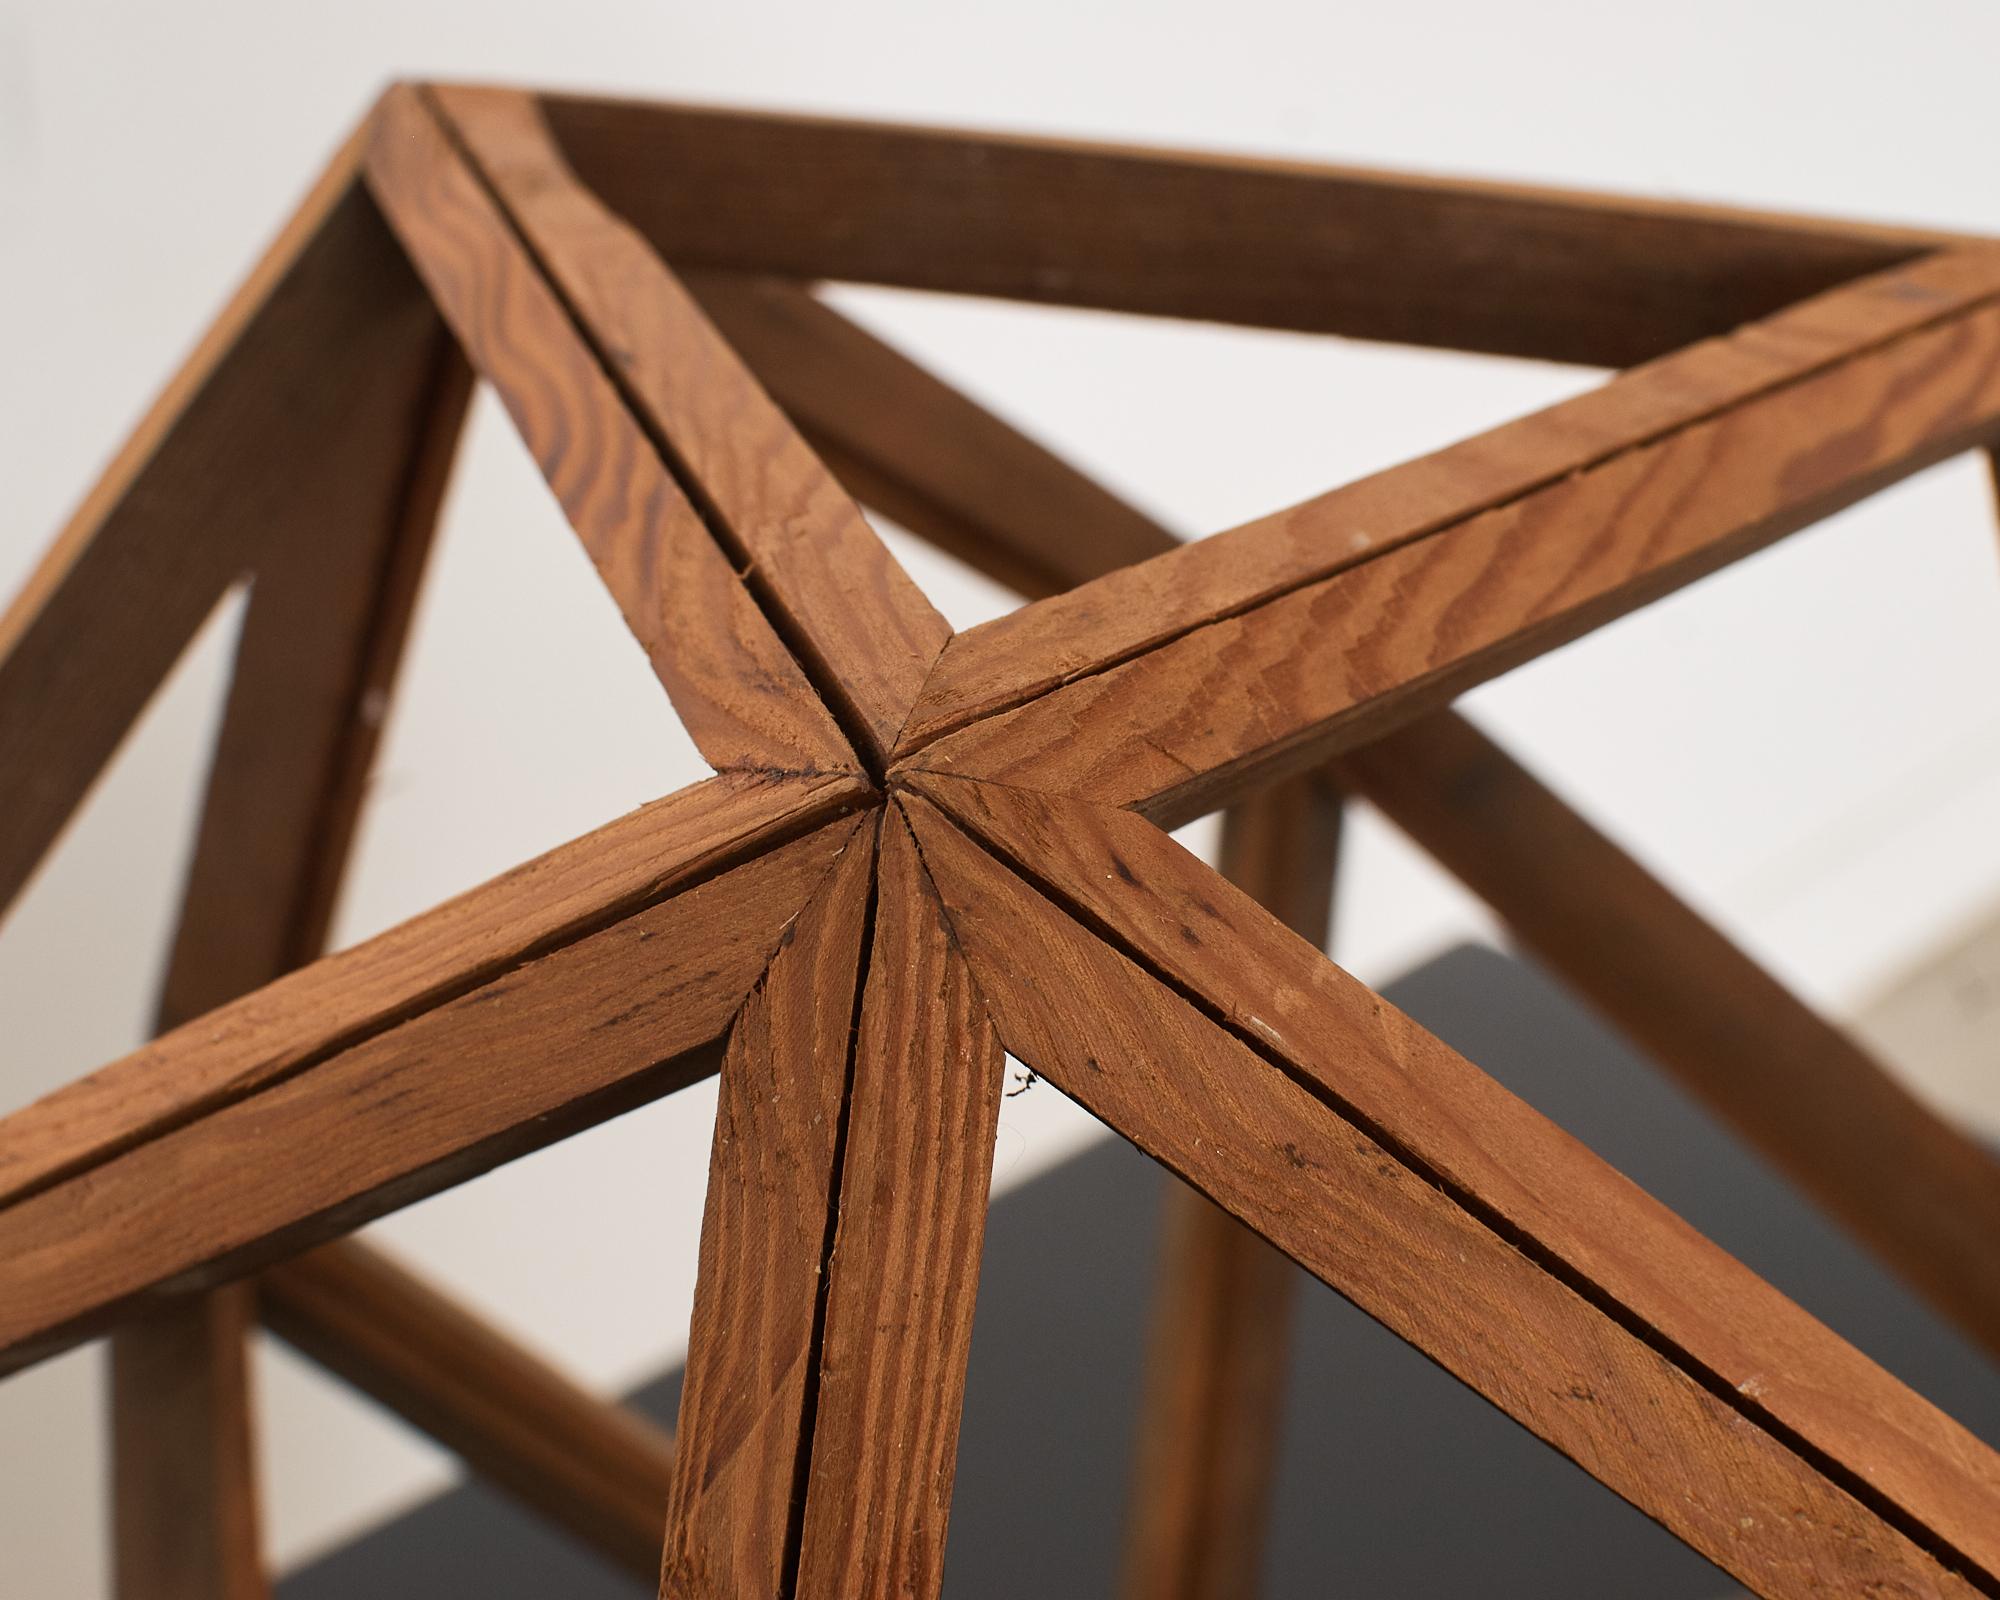 Hand-Crafted Wooden Geometric Icosahedron Objet D' Art For Sale